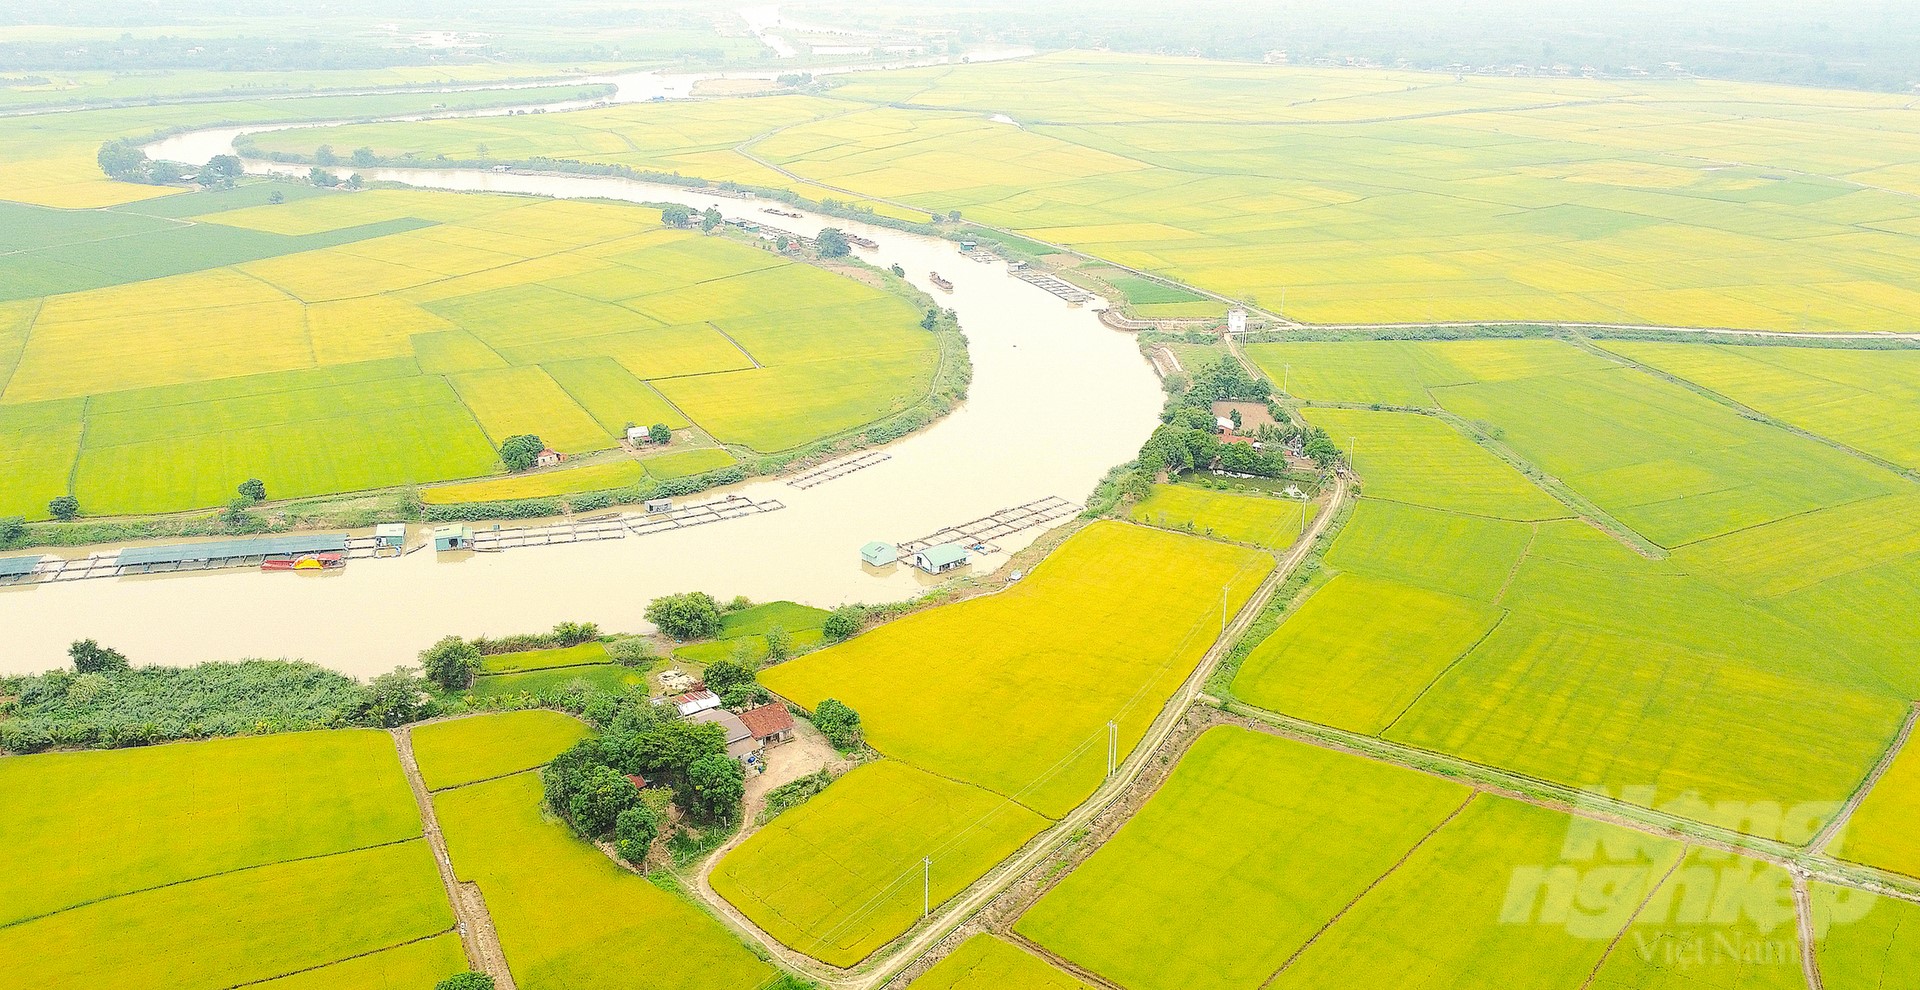 ST rice field of Buon Choah Agricultural Cooperative on the K'rong No River. Photo: Hong Thuy.